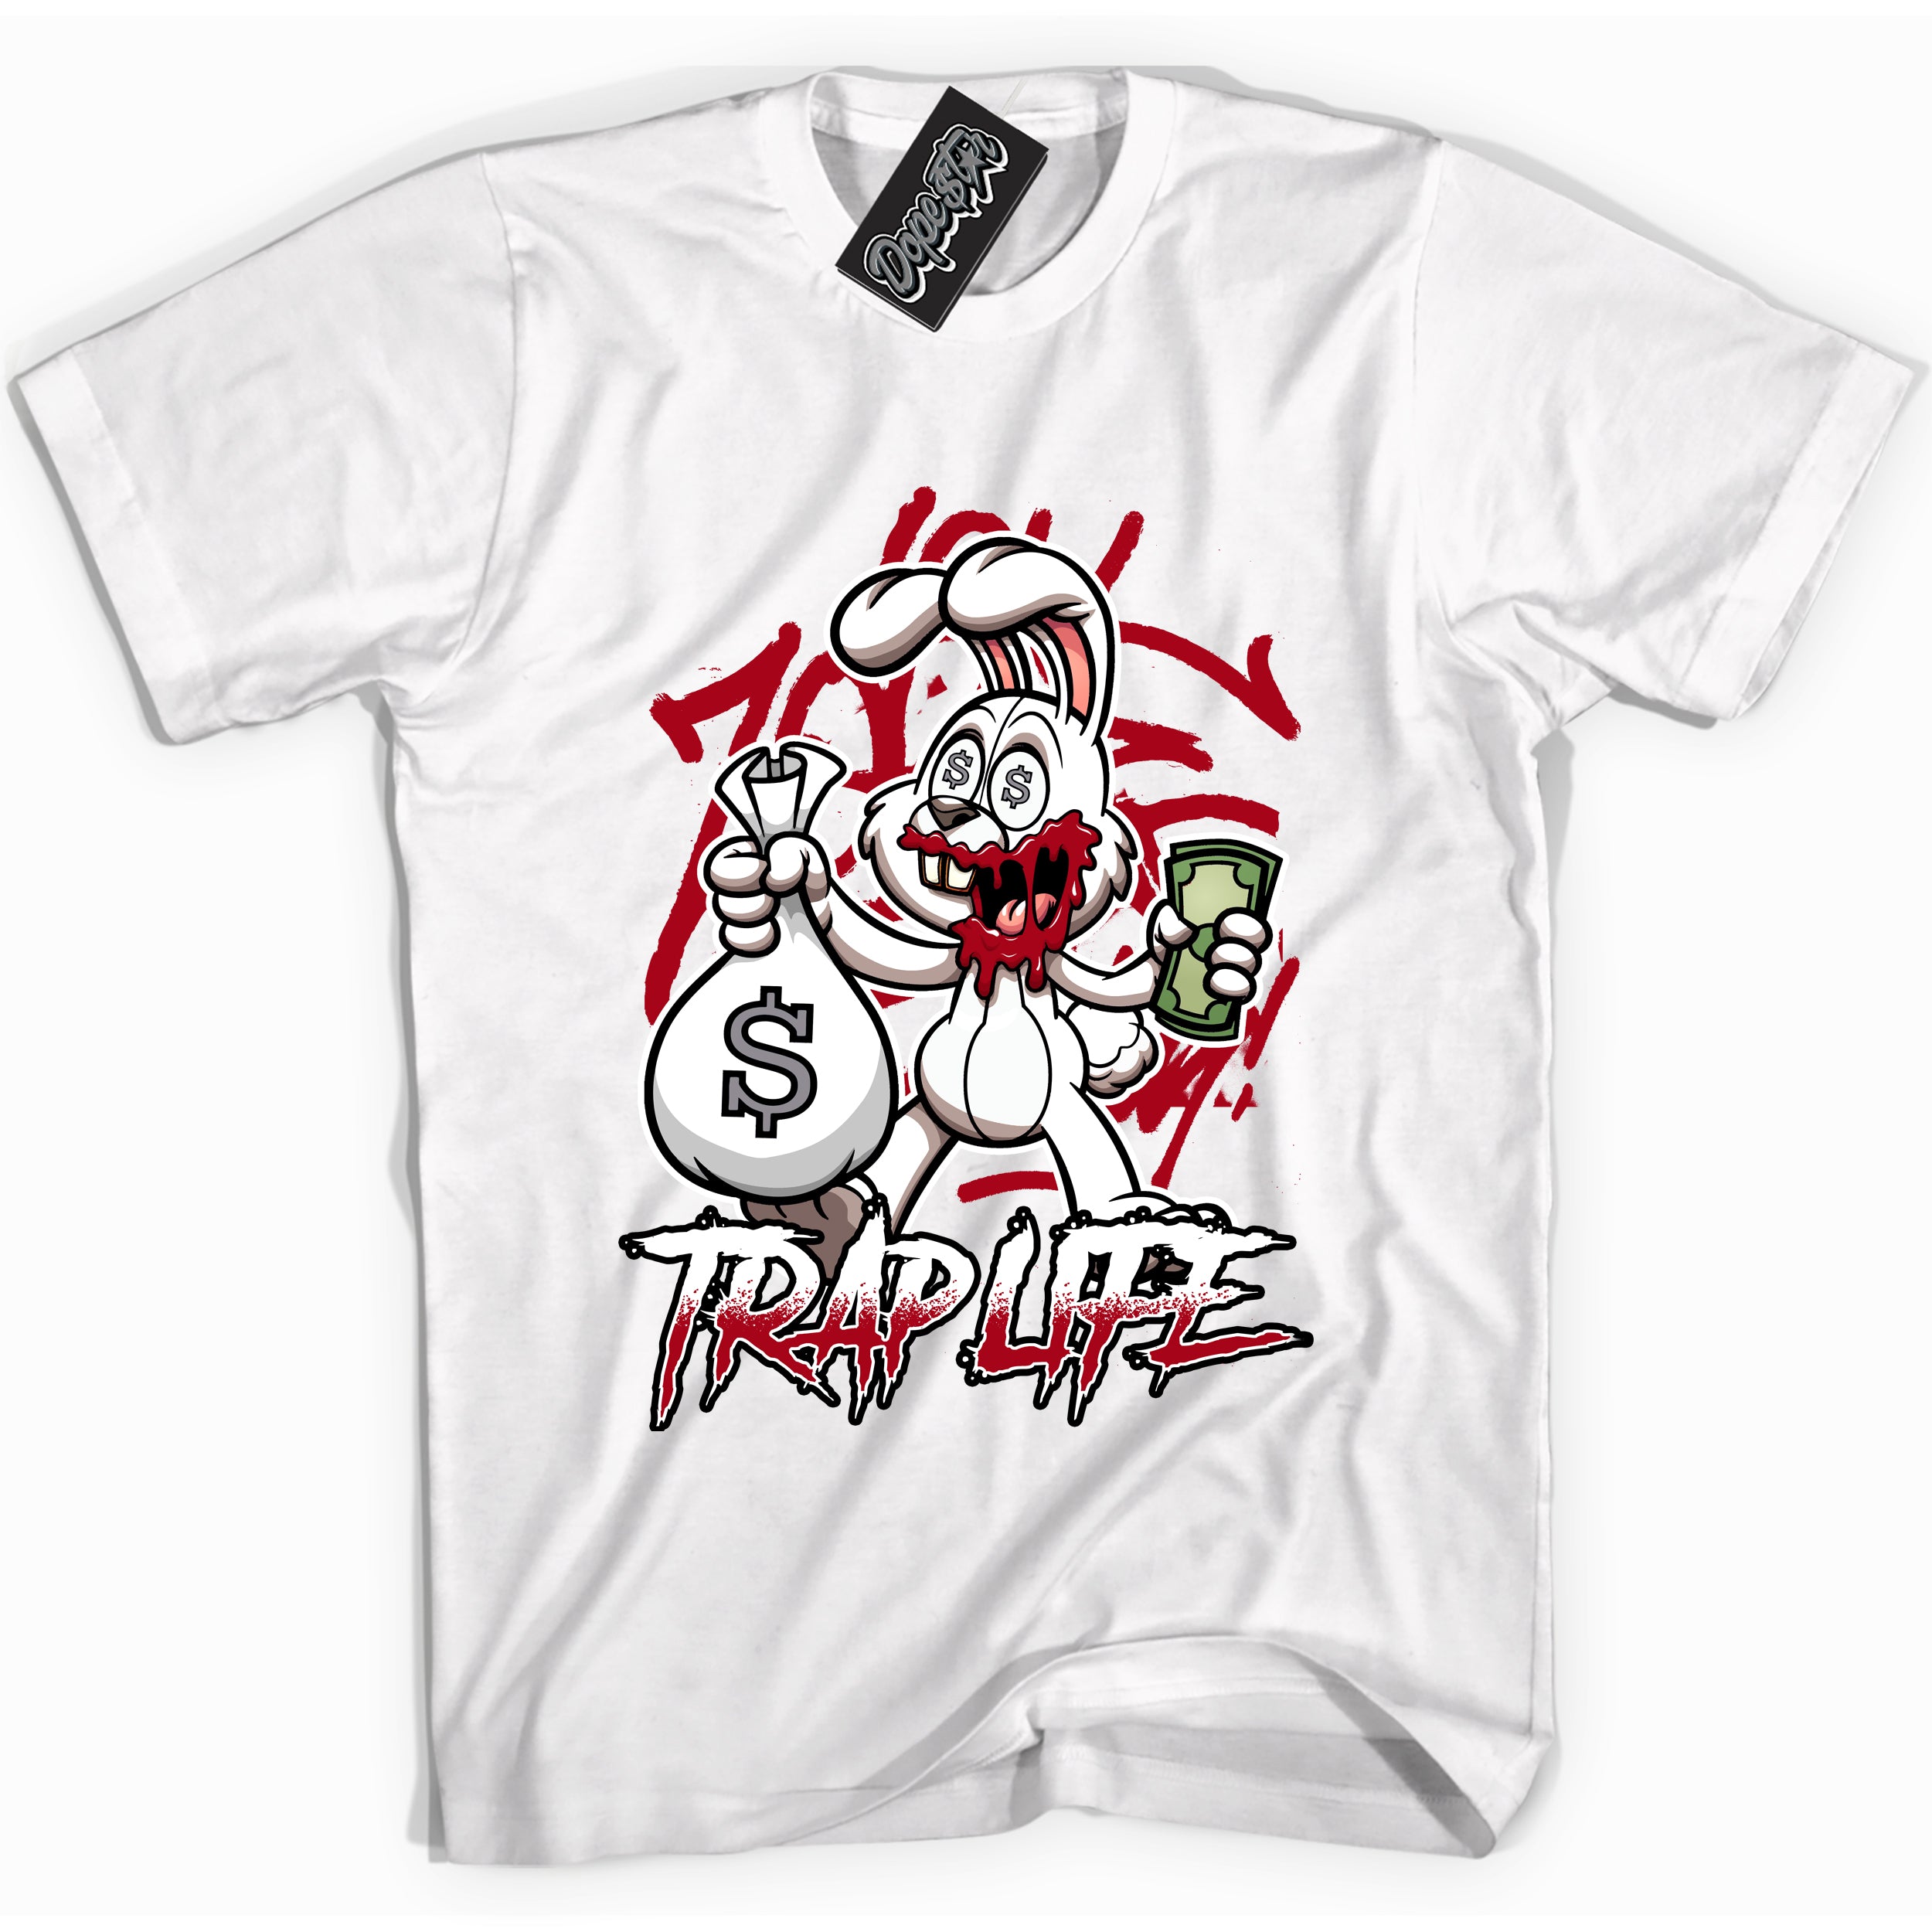 Cool White Shirt with “ Trap Rabbit” design that perfectly matches Bred Reimagined 4s Jordans.